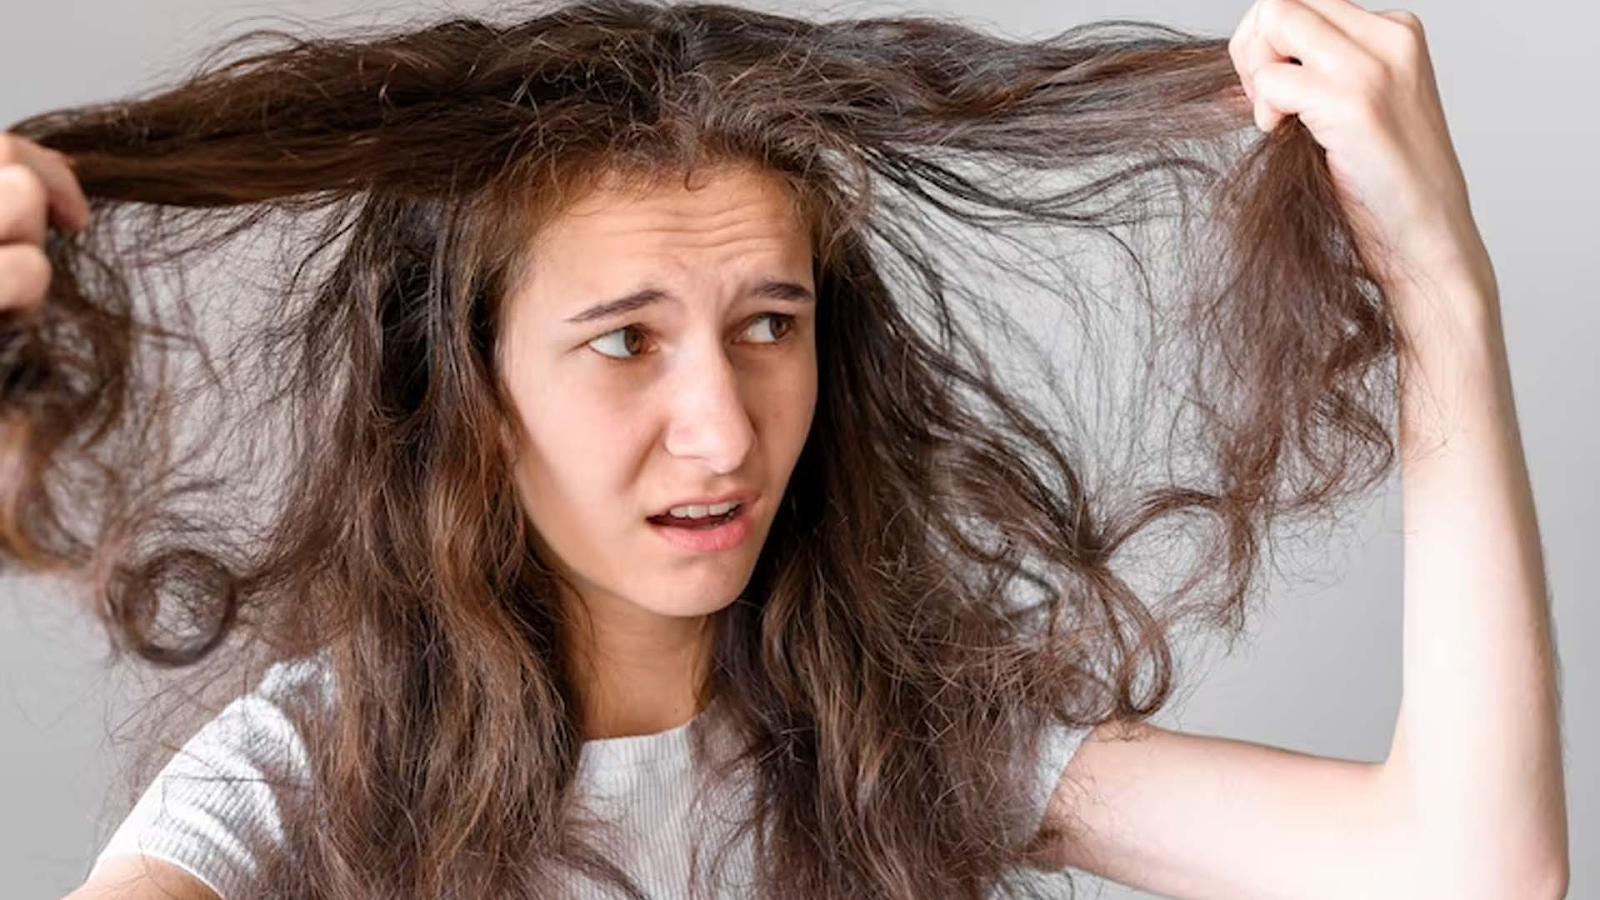 What Are The Must-Have Hair Care Products For Frizzy Locks?